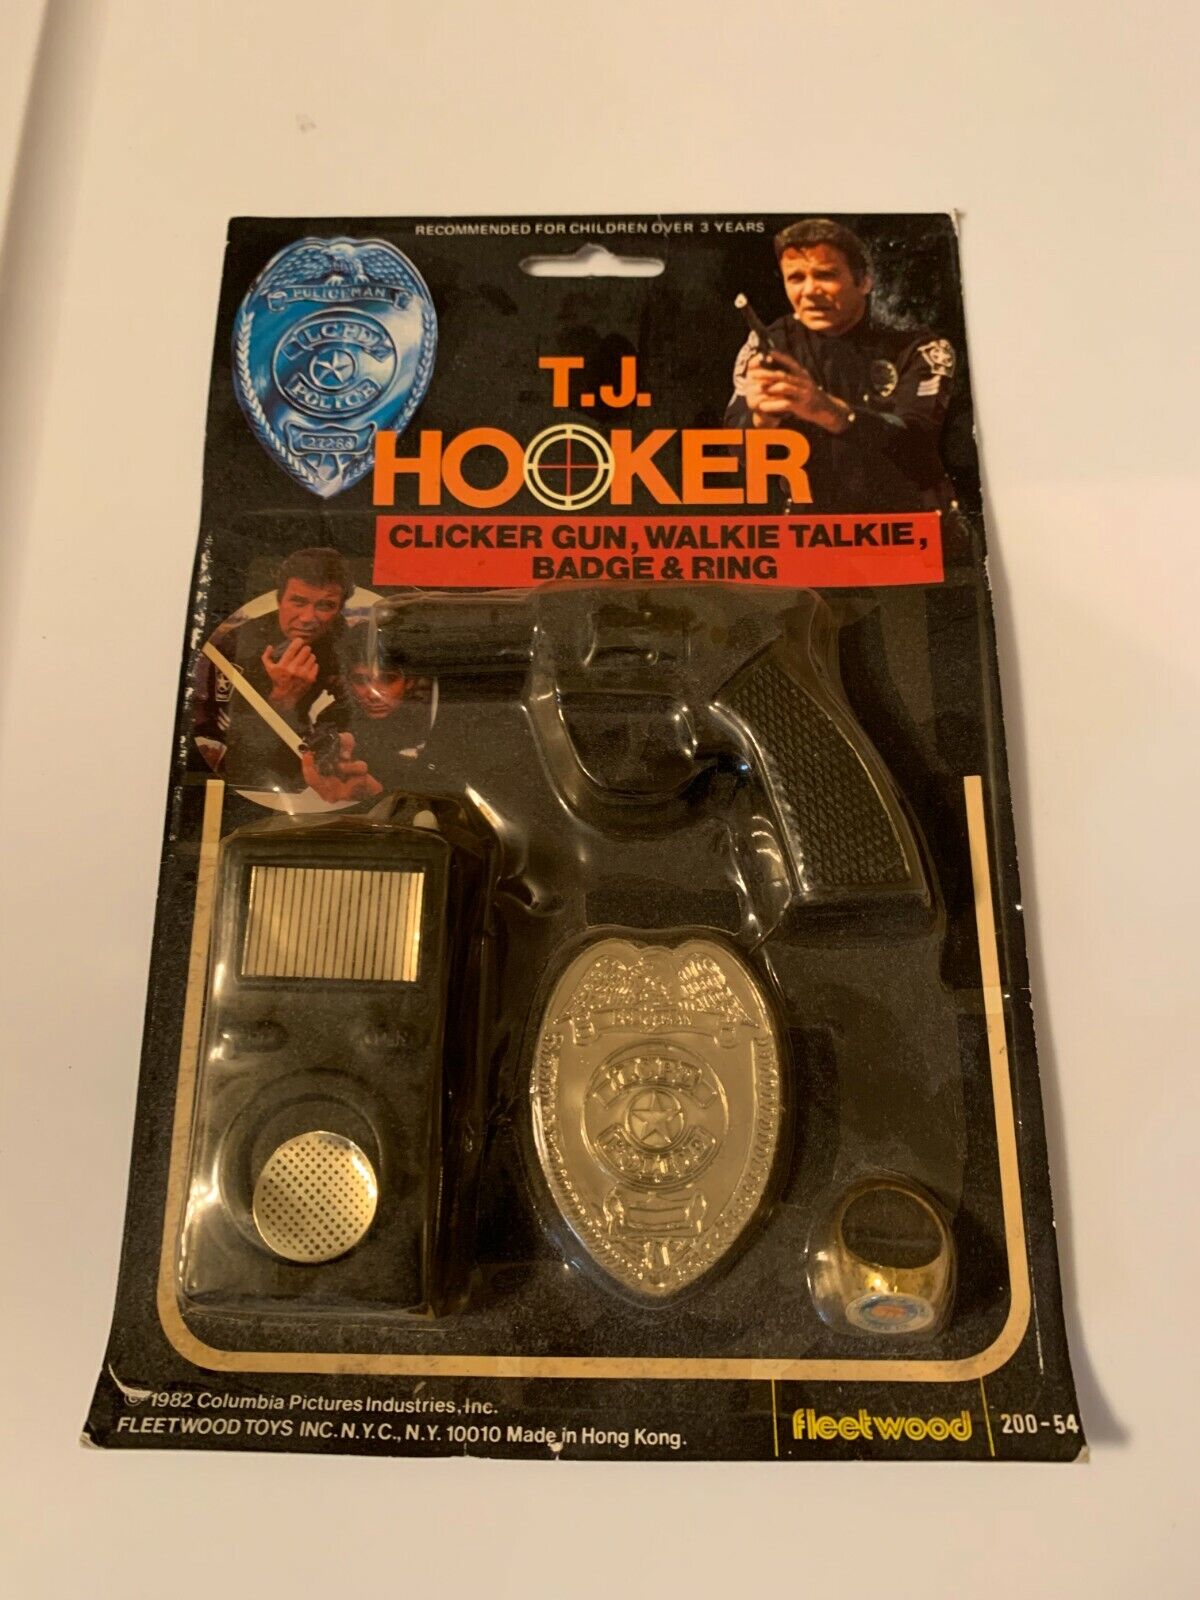 5 Awesome Things on eBay this Week- TJ Hooker Rack Toy